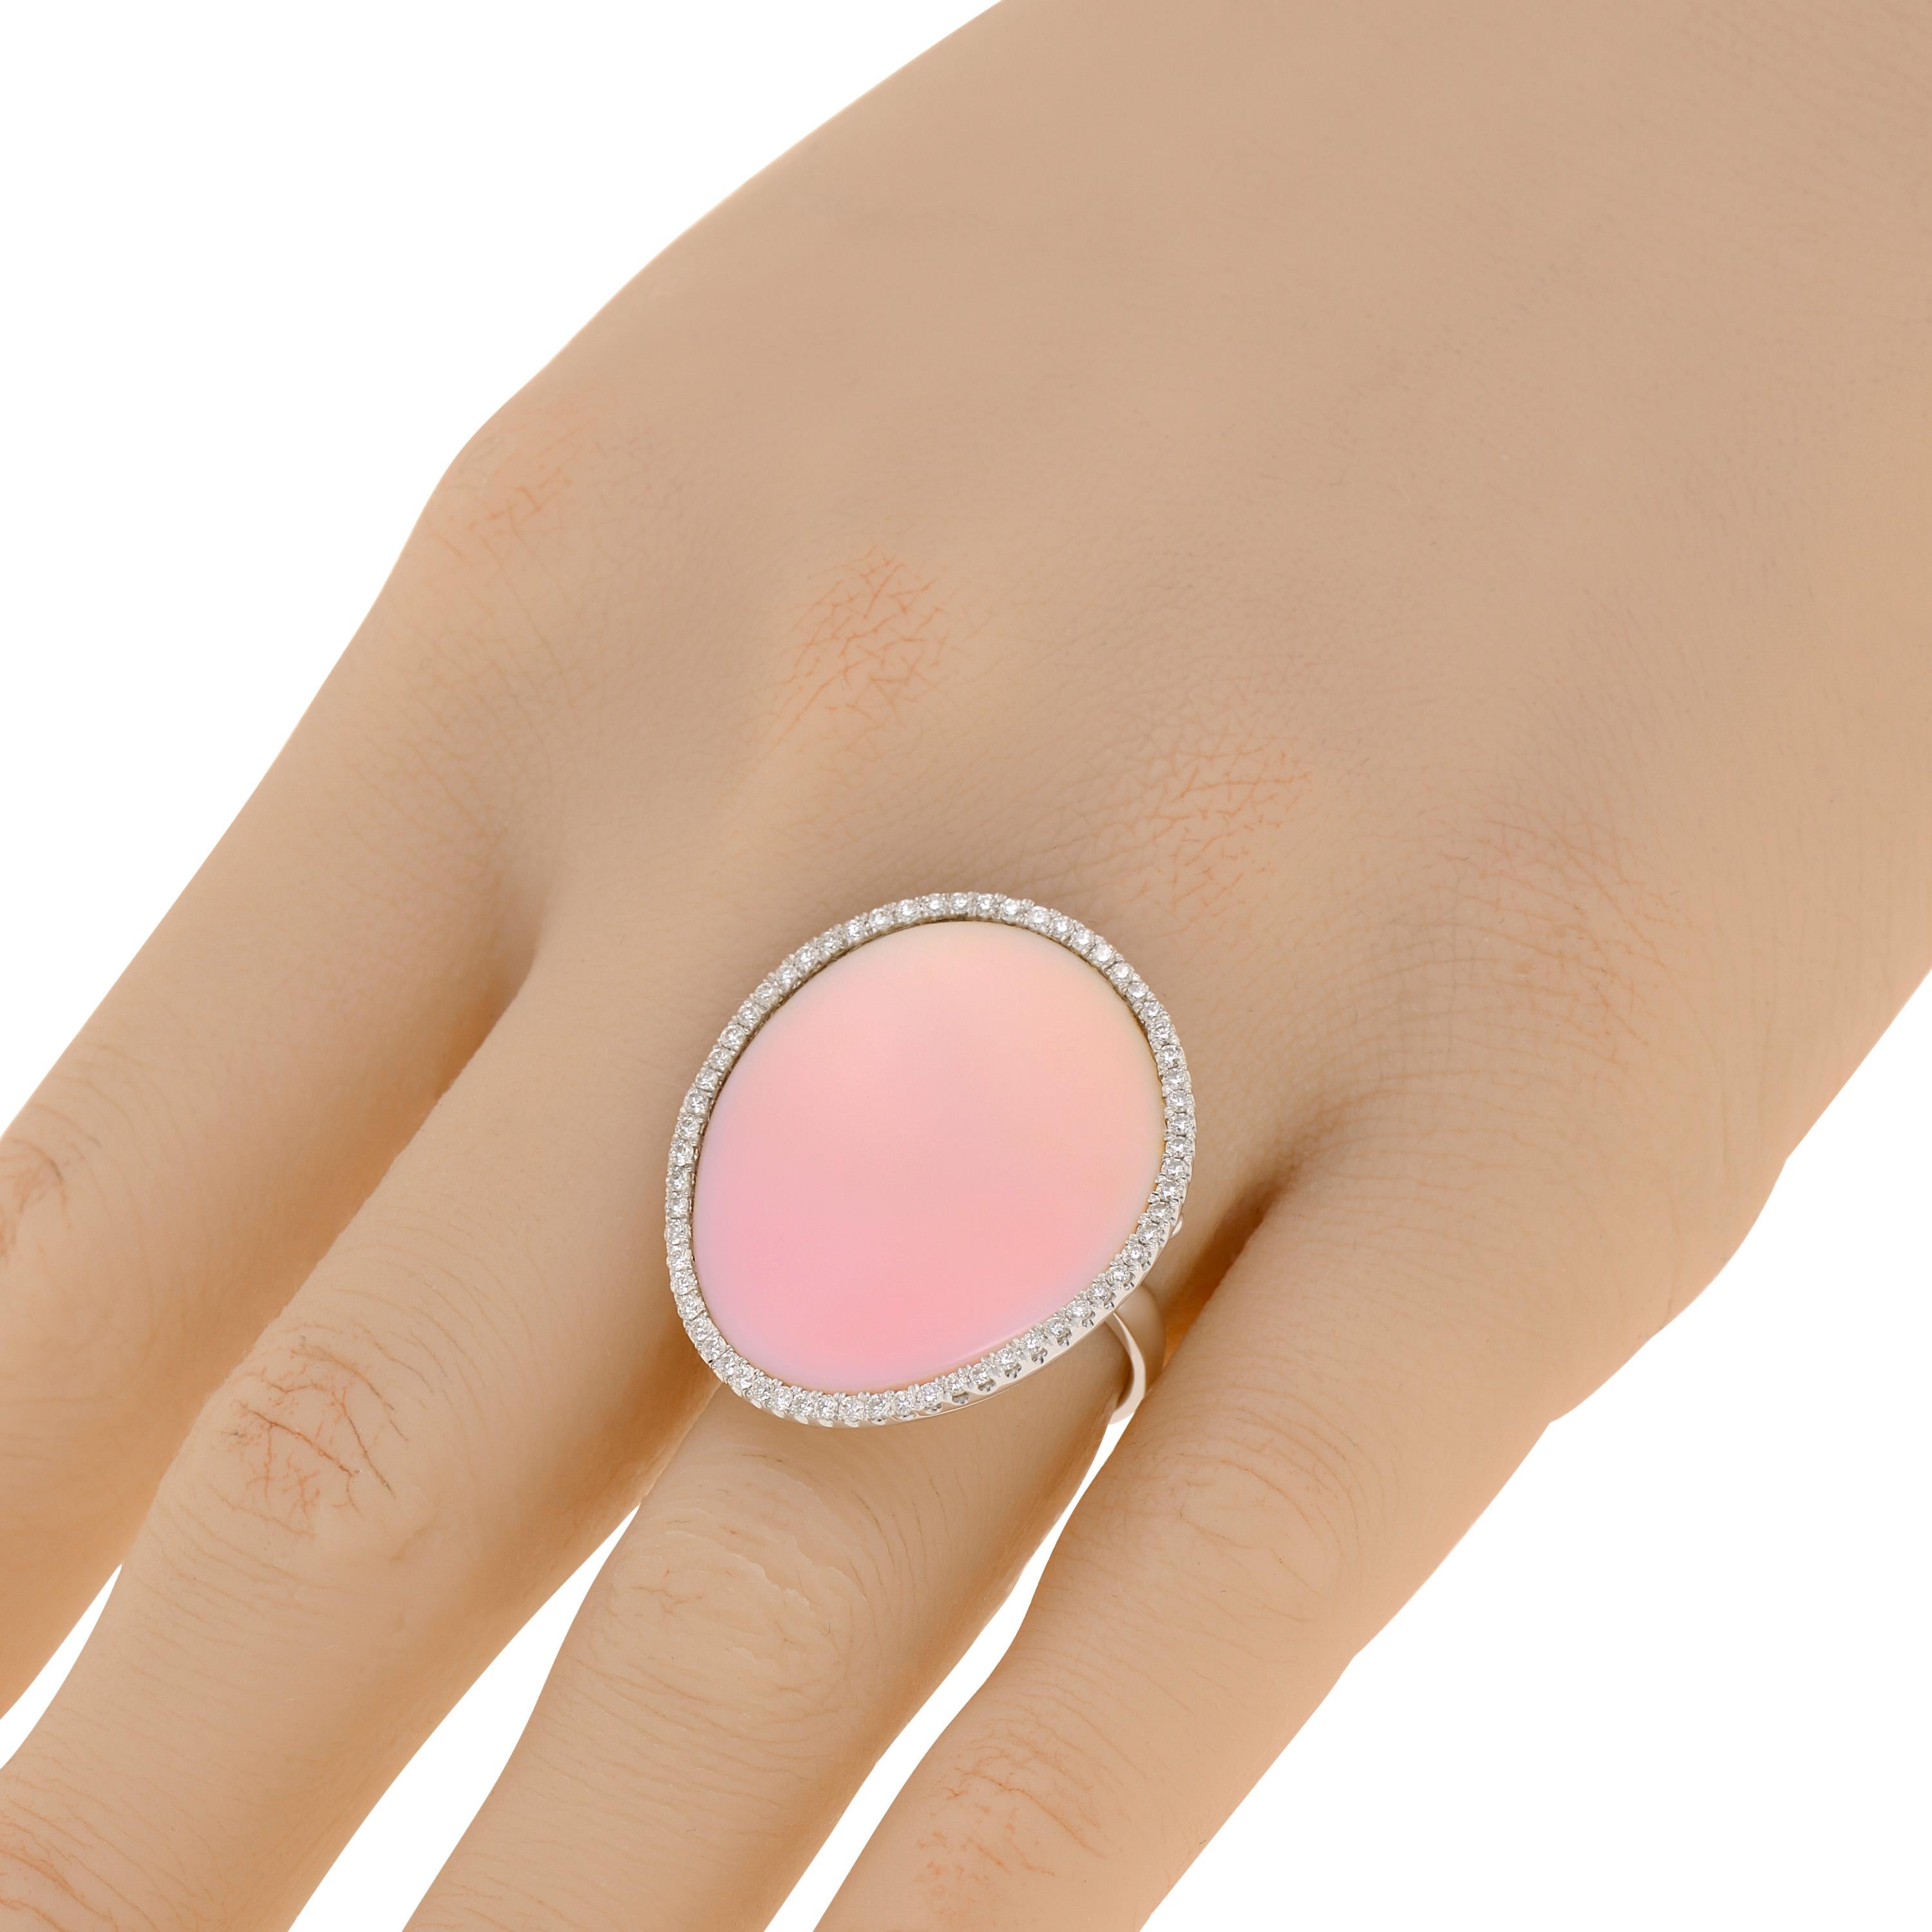 Mimi Milano 18K white gold statement ring features pink Mother of pearl and 0.5ct. tw. diamonds set in 18K rose gold. The ring size is 6.25 (52.6). The decoration size is 1 1/8